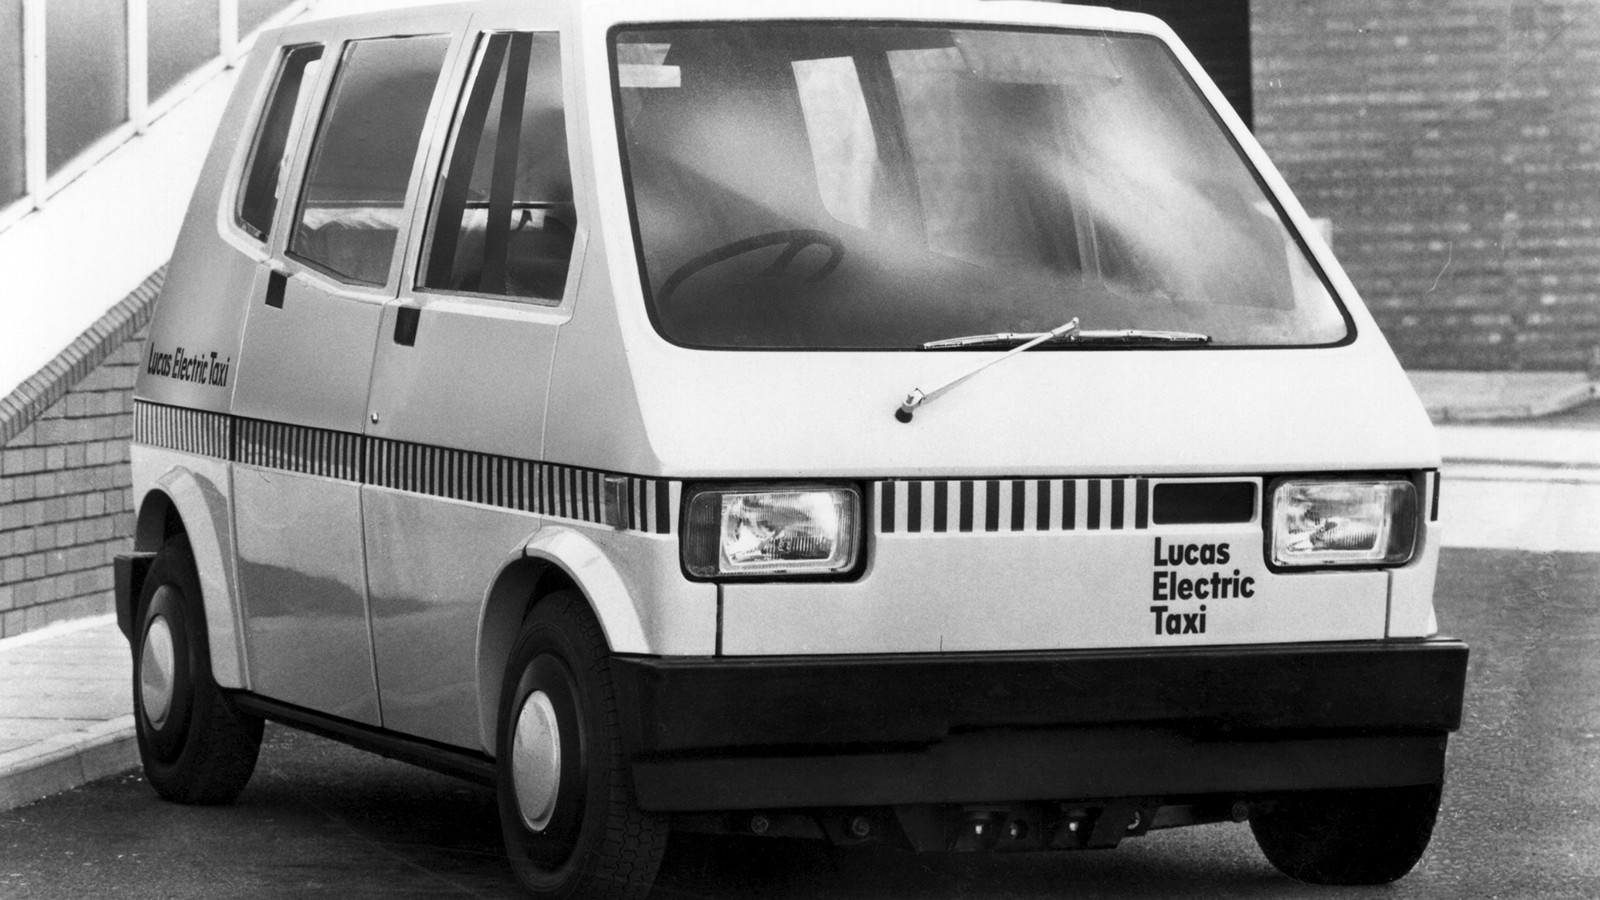 10 classic electric cars you never knew existed - Lucas Electric Taxi 2